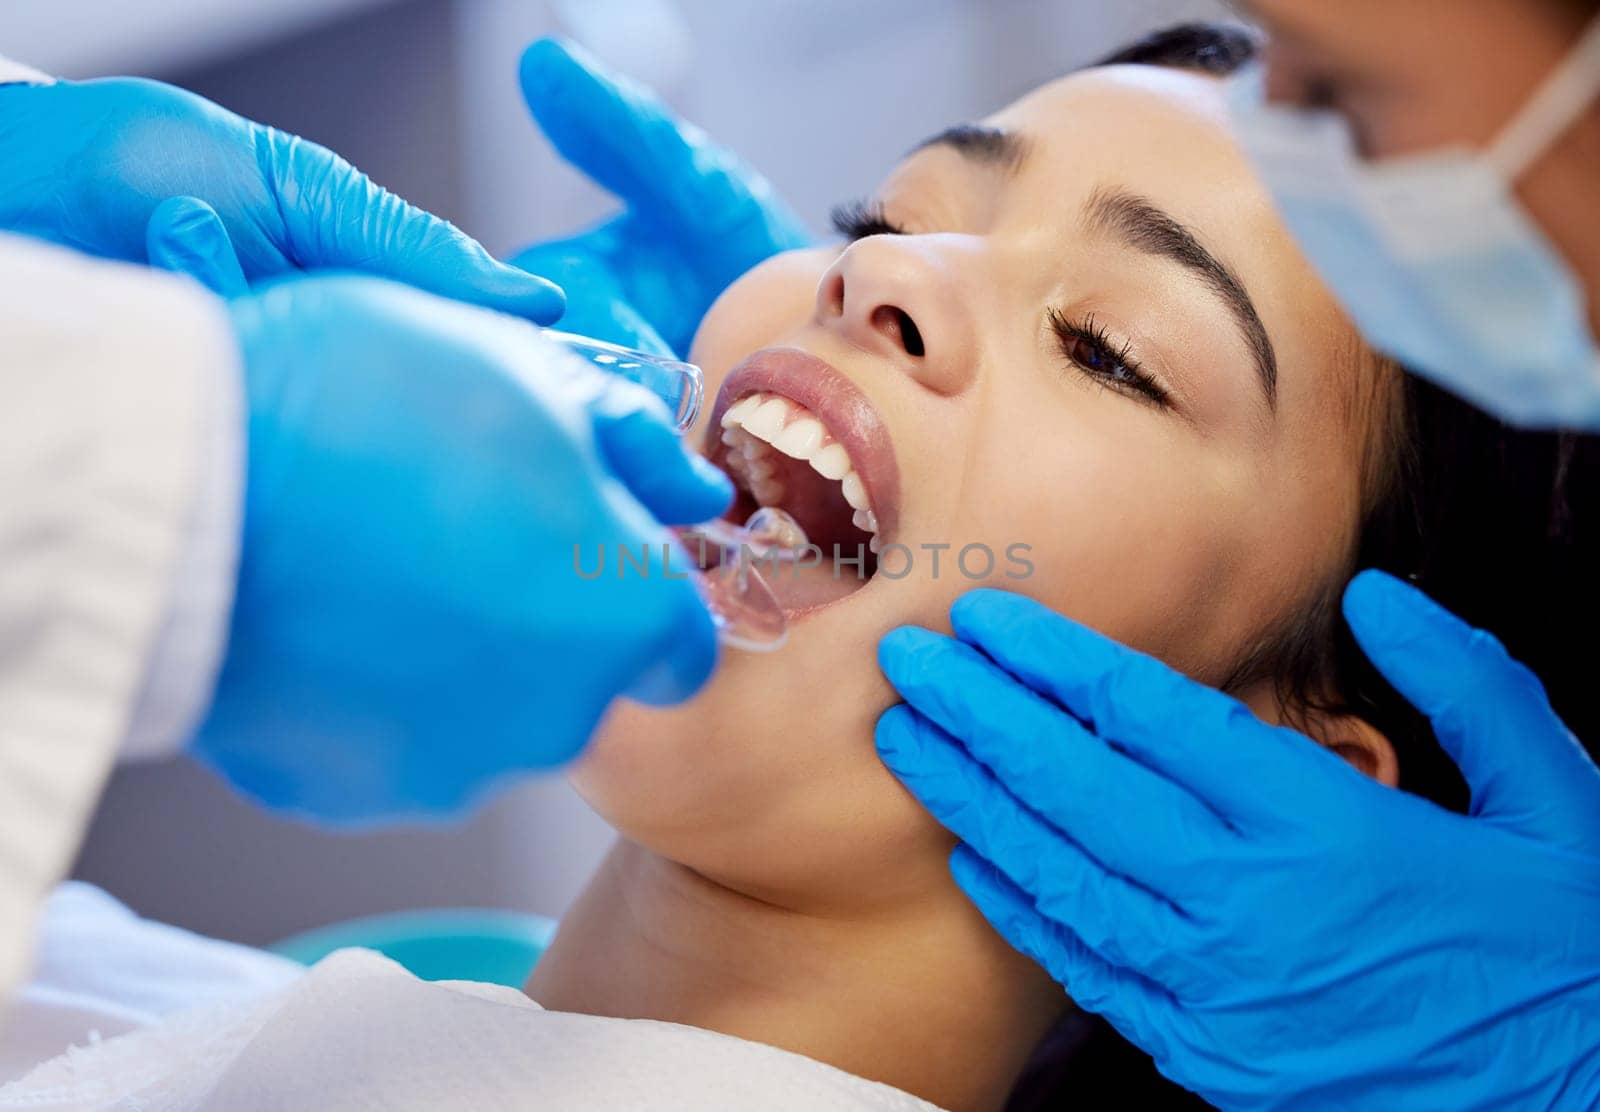 Those are some healthy looking teeth. a young woman having a dental procedure performed on her. by YuriArcurs